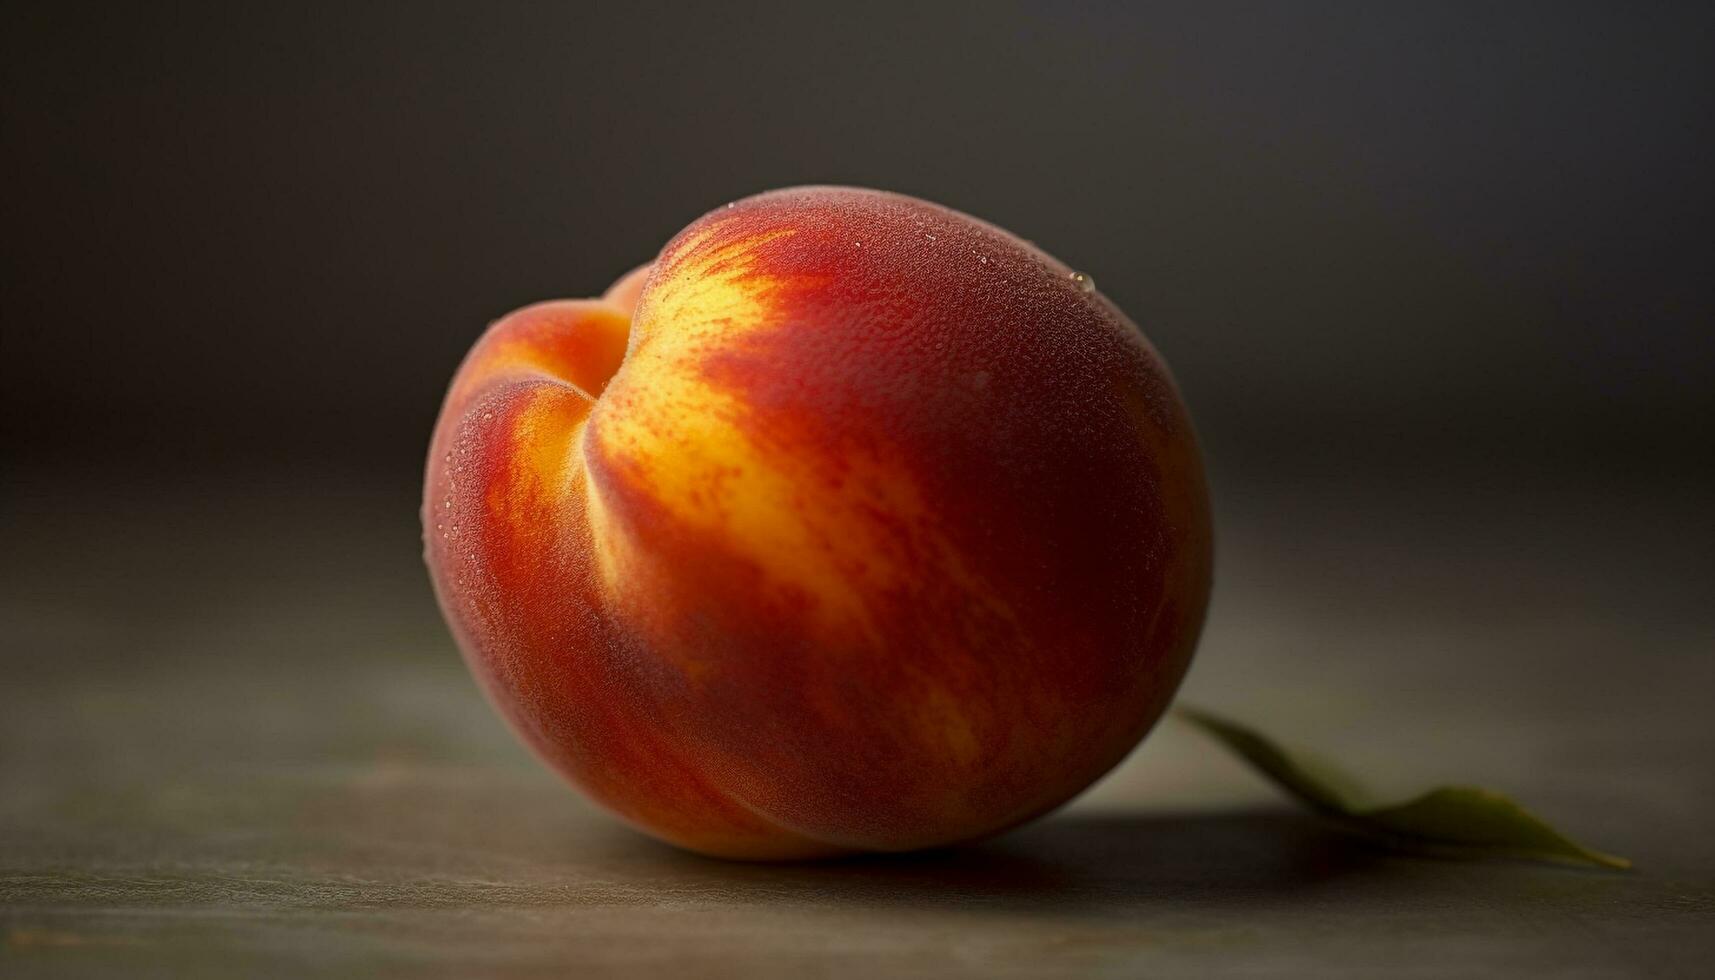 Juicy ripe peach, a healthy snack for a vibrant lifestyle generated by AI photo